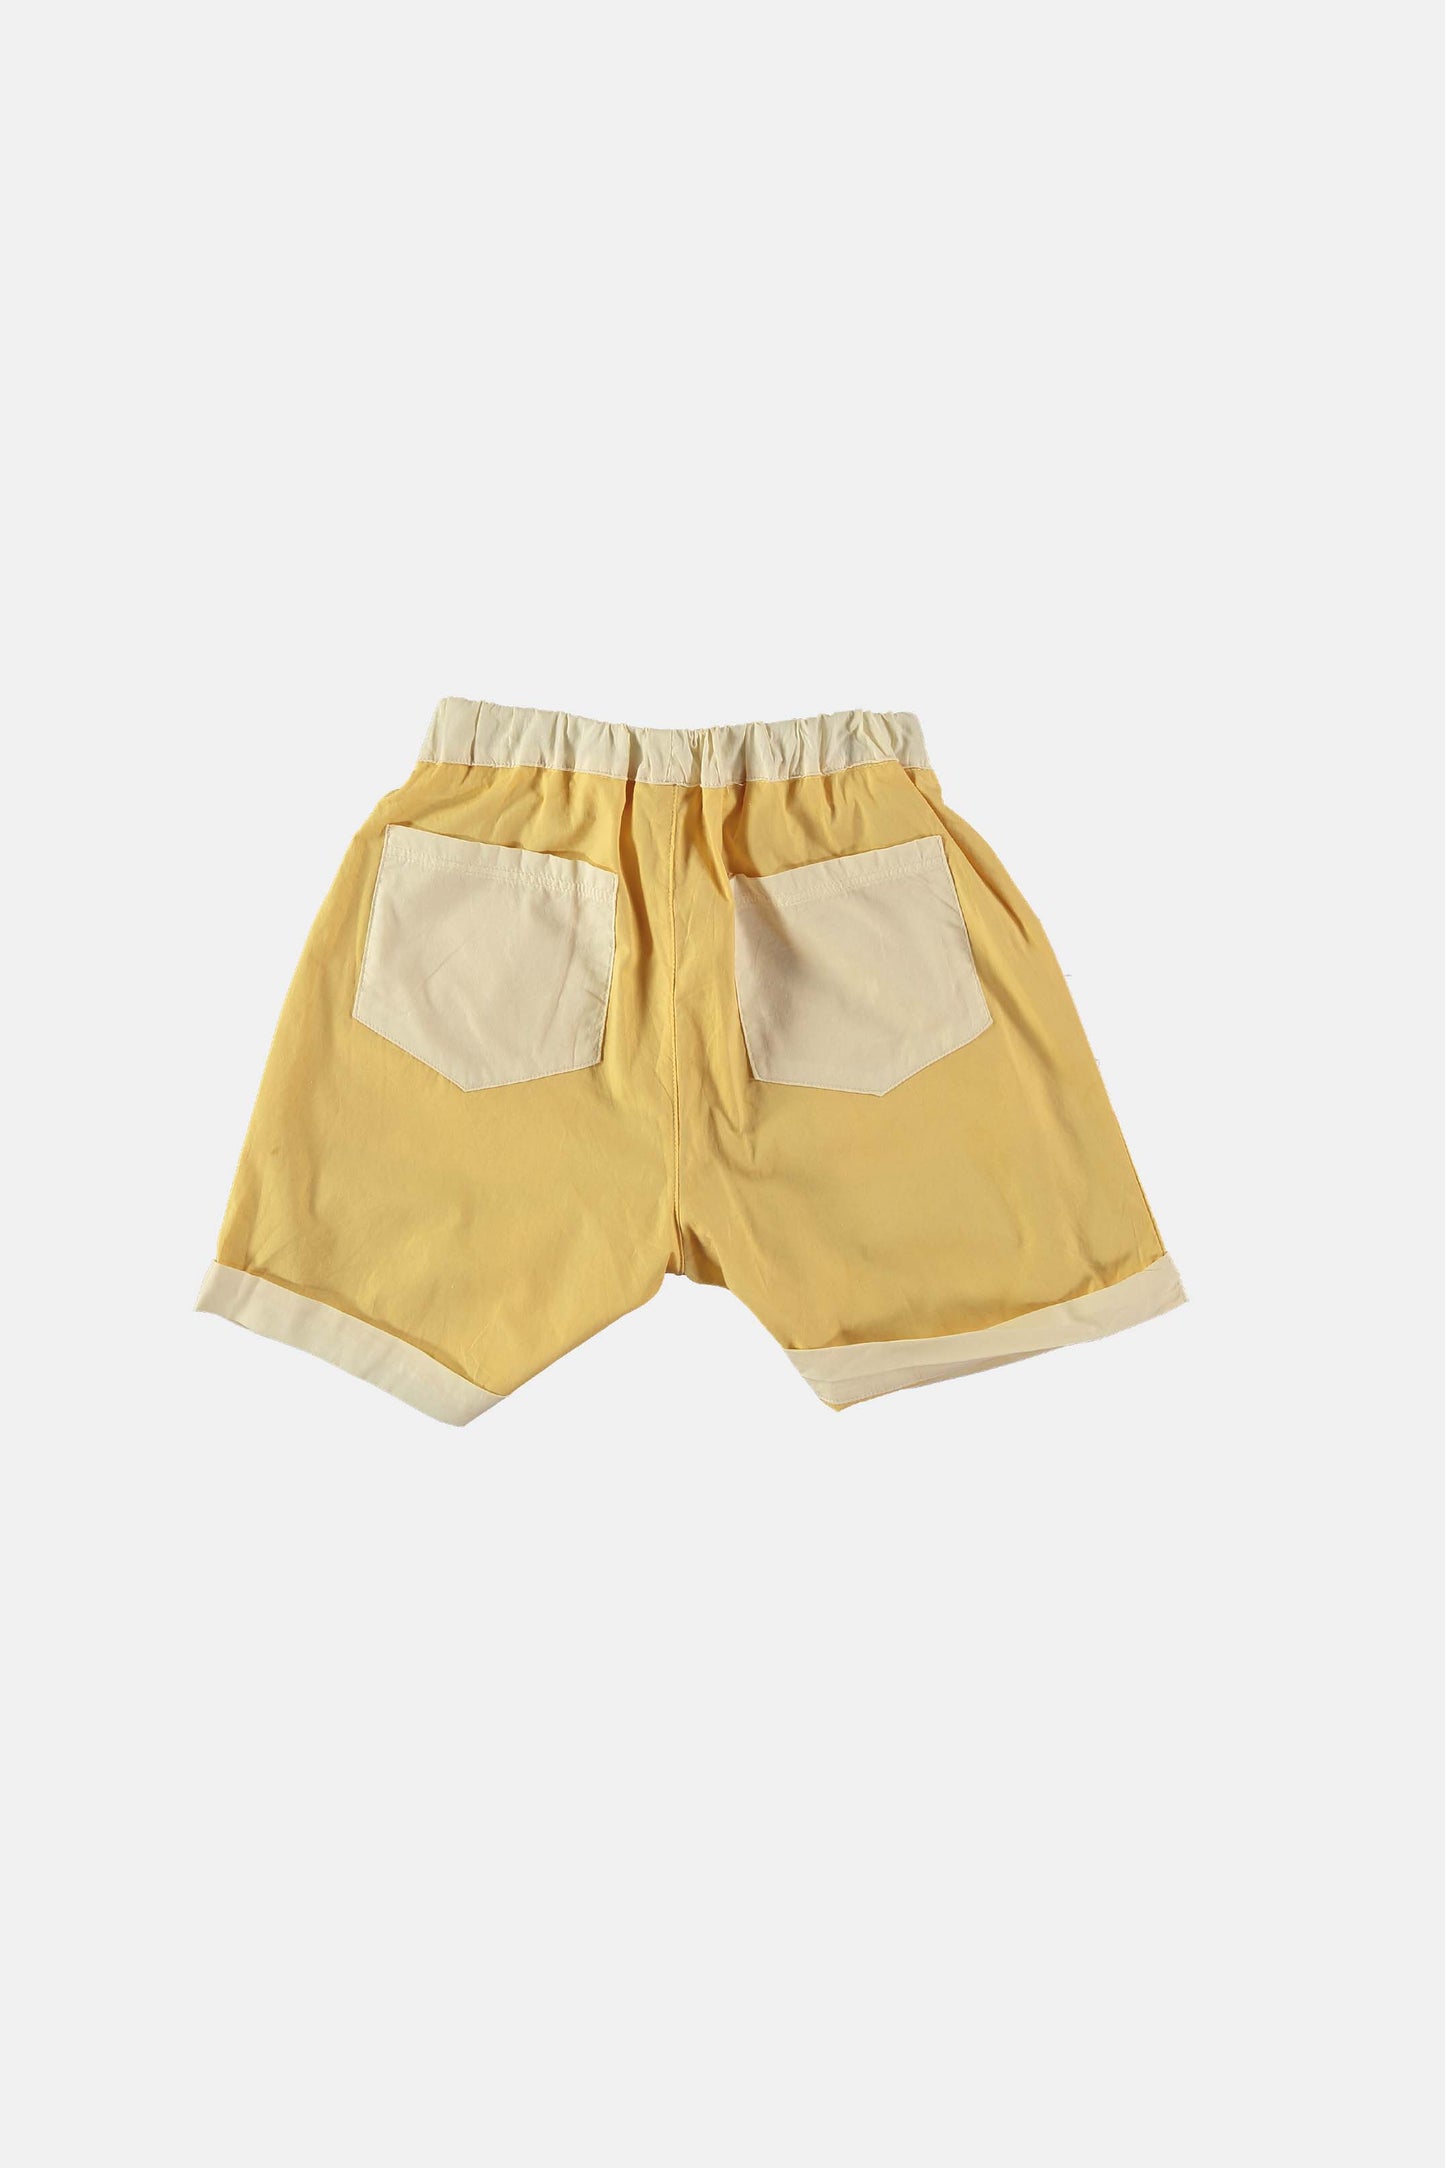 Coco Au Lait YELLOW VINTAGE WIDE SHORTS  Yellow